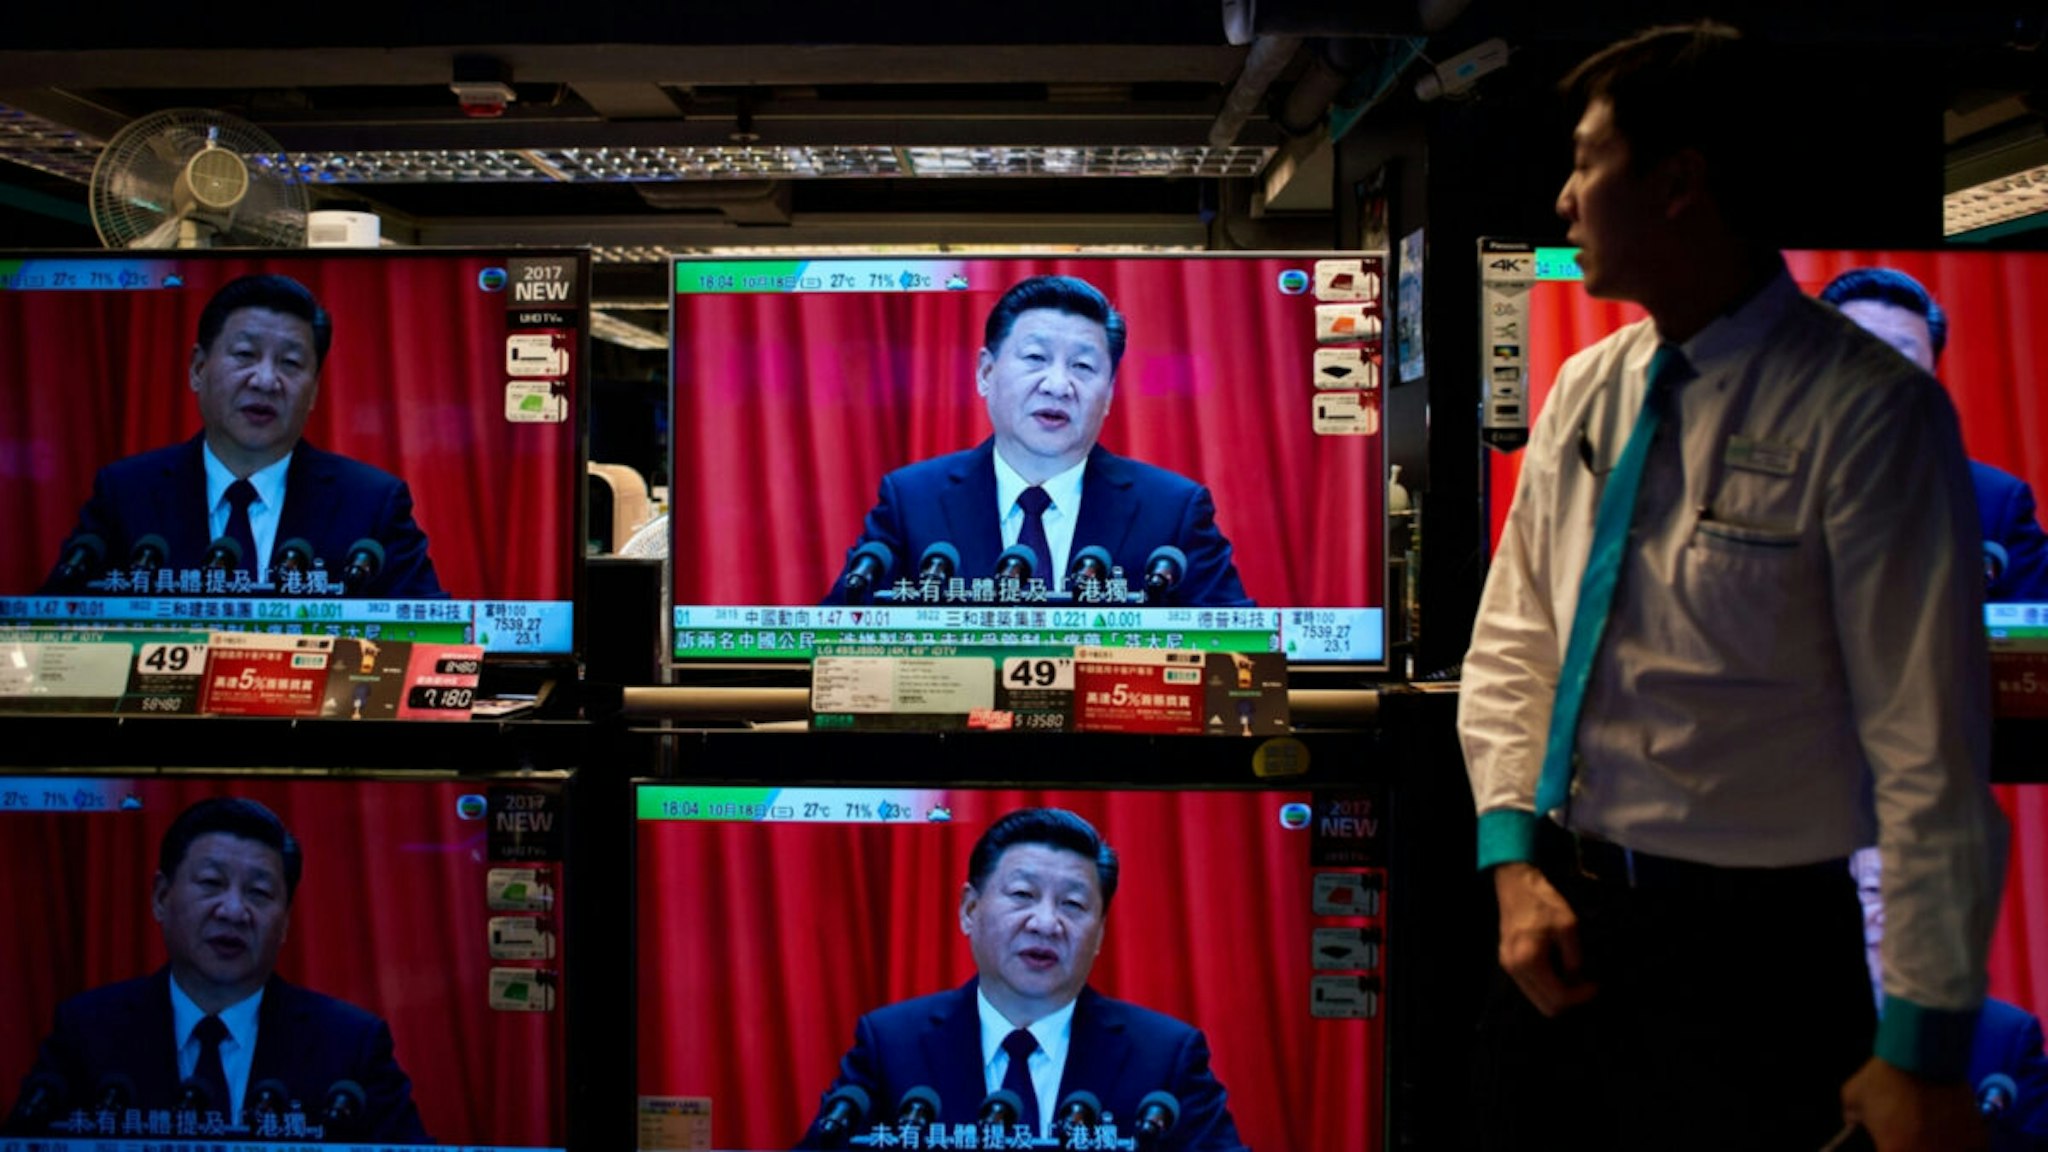 An electronics shop employee in Hong Kong on October 18, 2017 looks at television sets showing a news report on China's President Xi Jinping's speech at the opening session of the Chinese Communist Party's five-yearly Congress at the Great Hall of the People in Beijing.